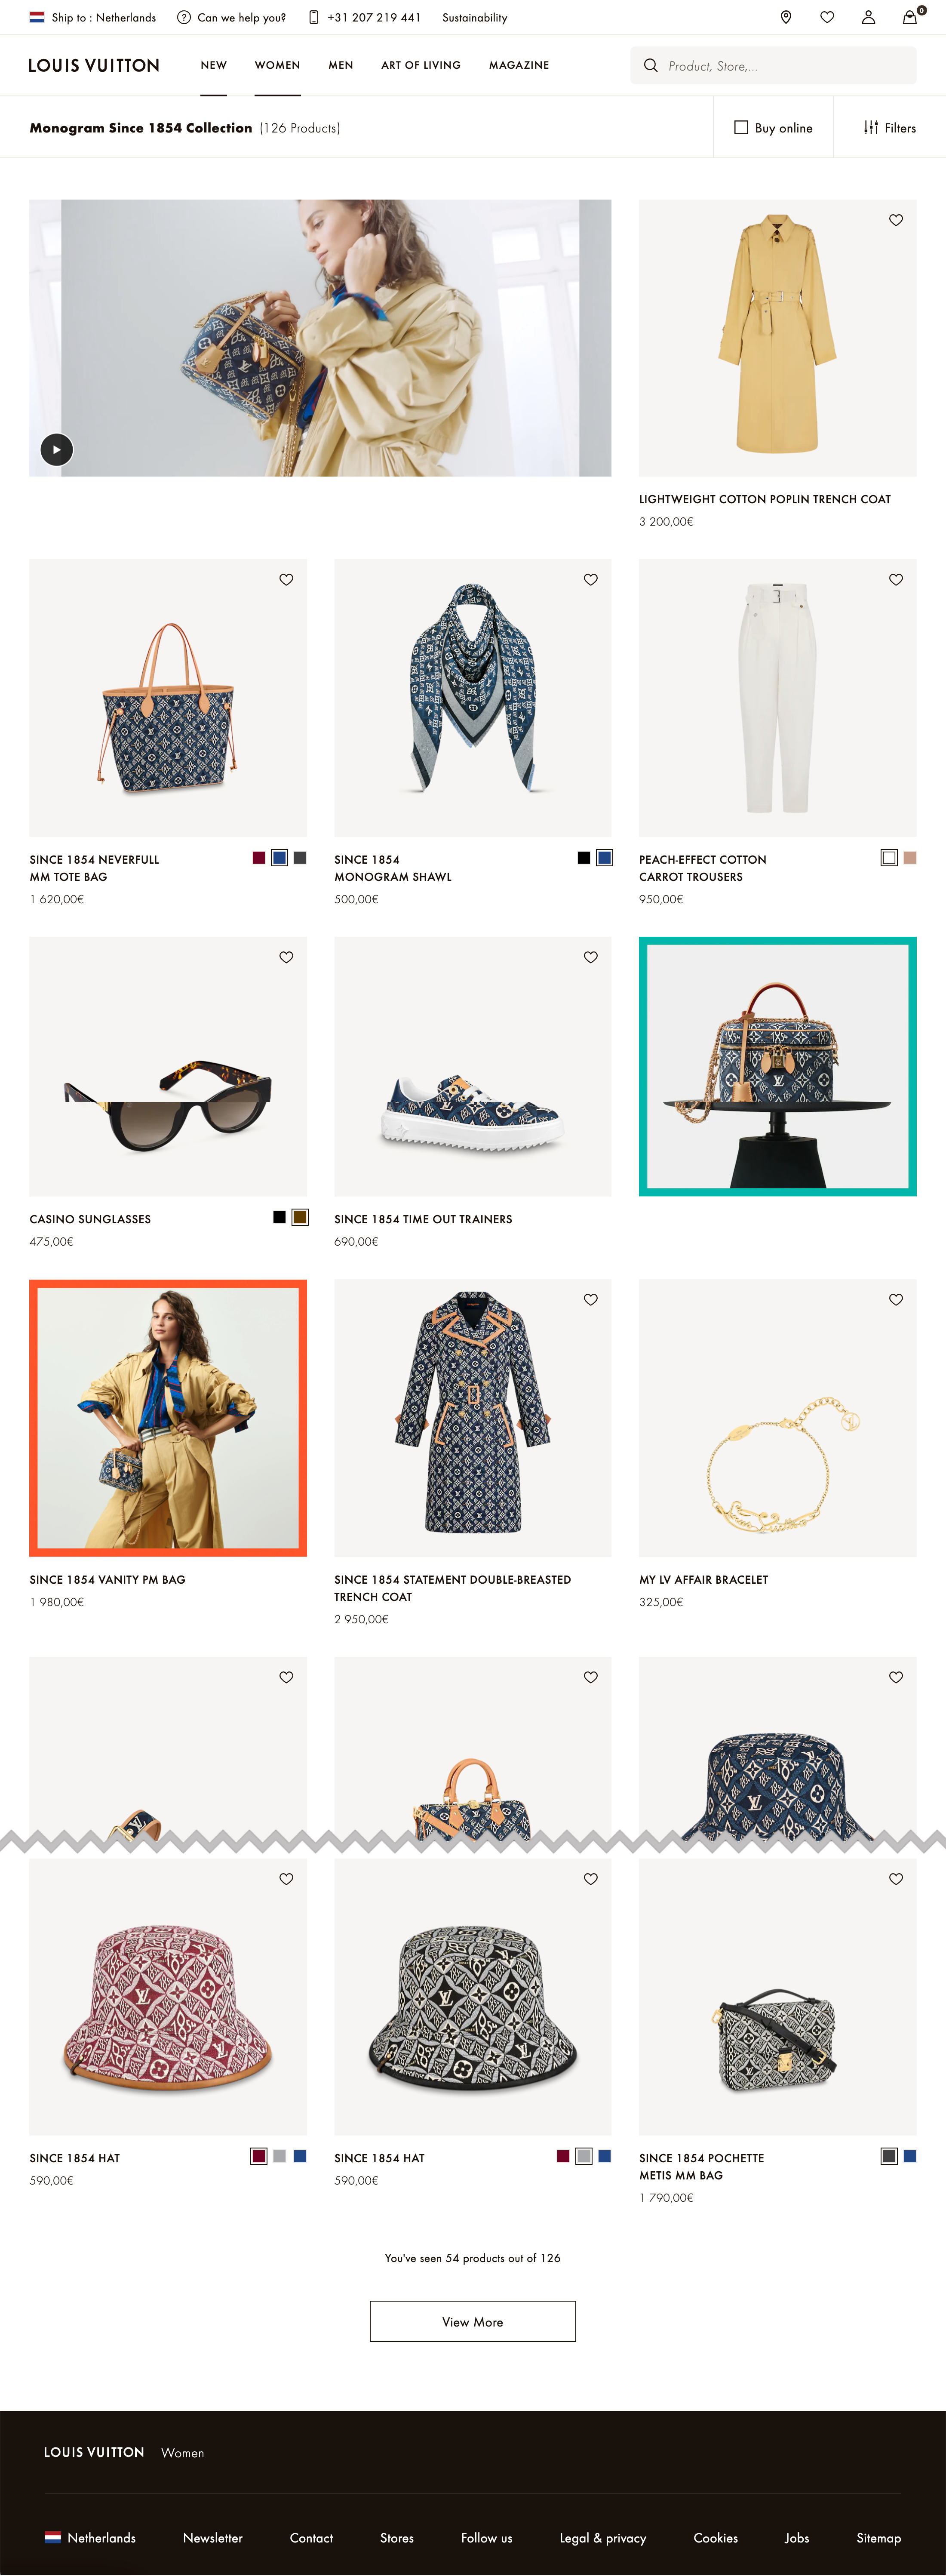 Louis Vuitton's Collection Page – 7 of 7 Collection Page Examples